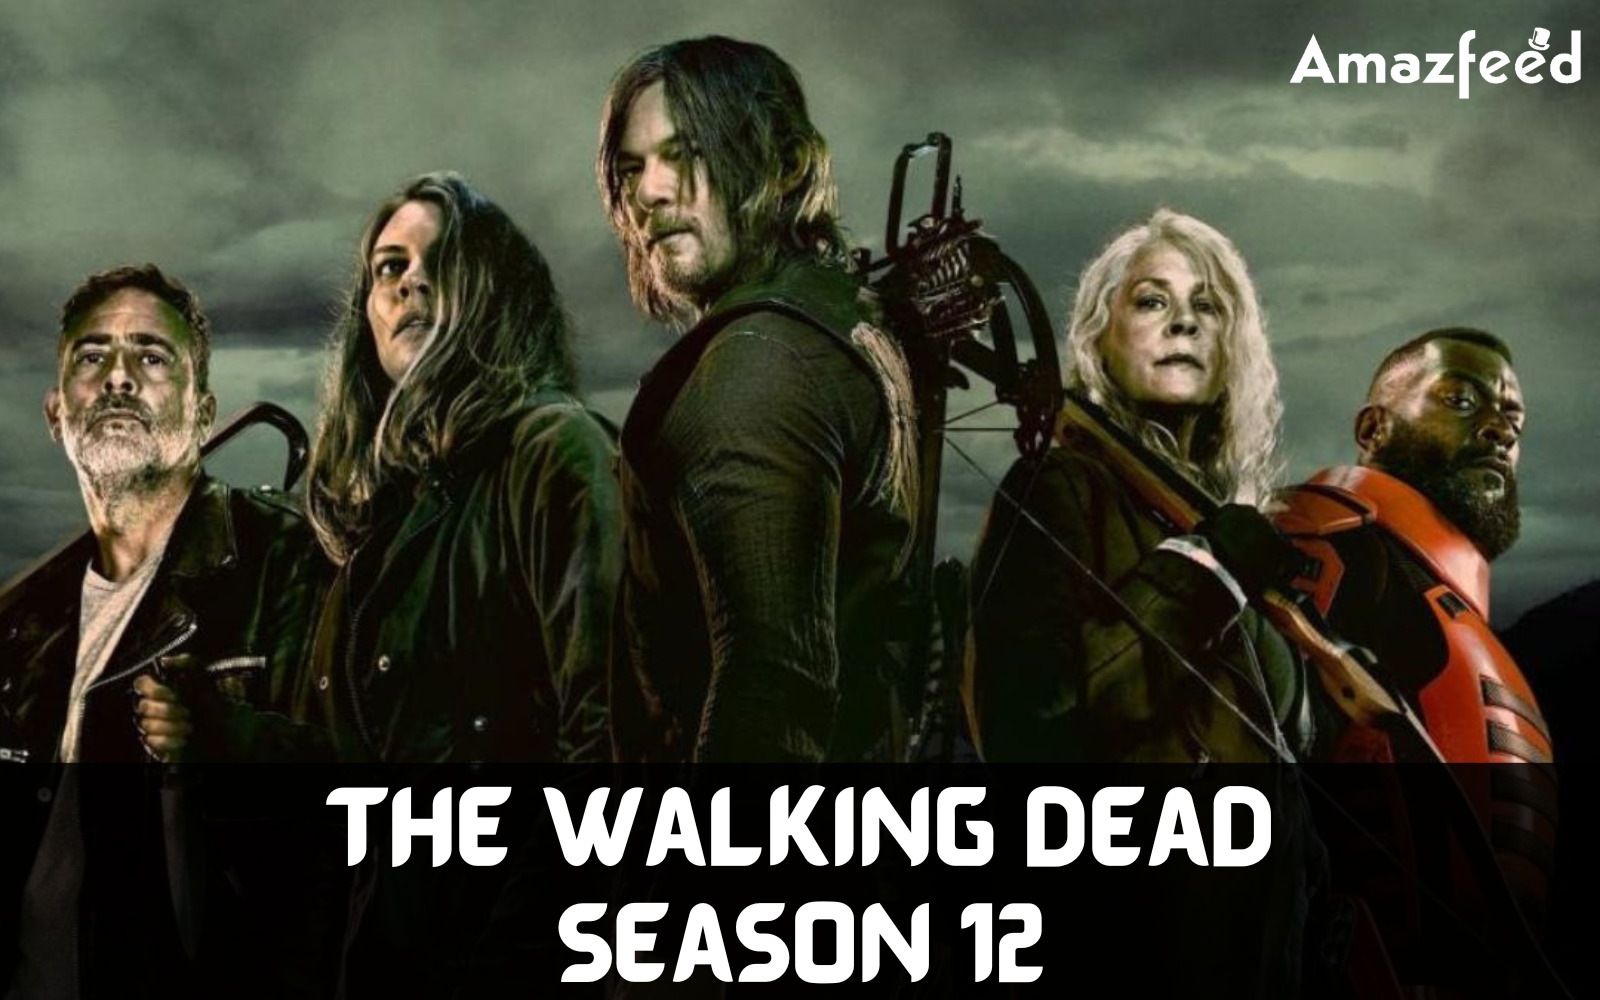 How many Episodes of The Walking Dead Season 12 will be there